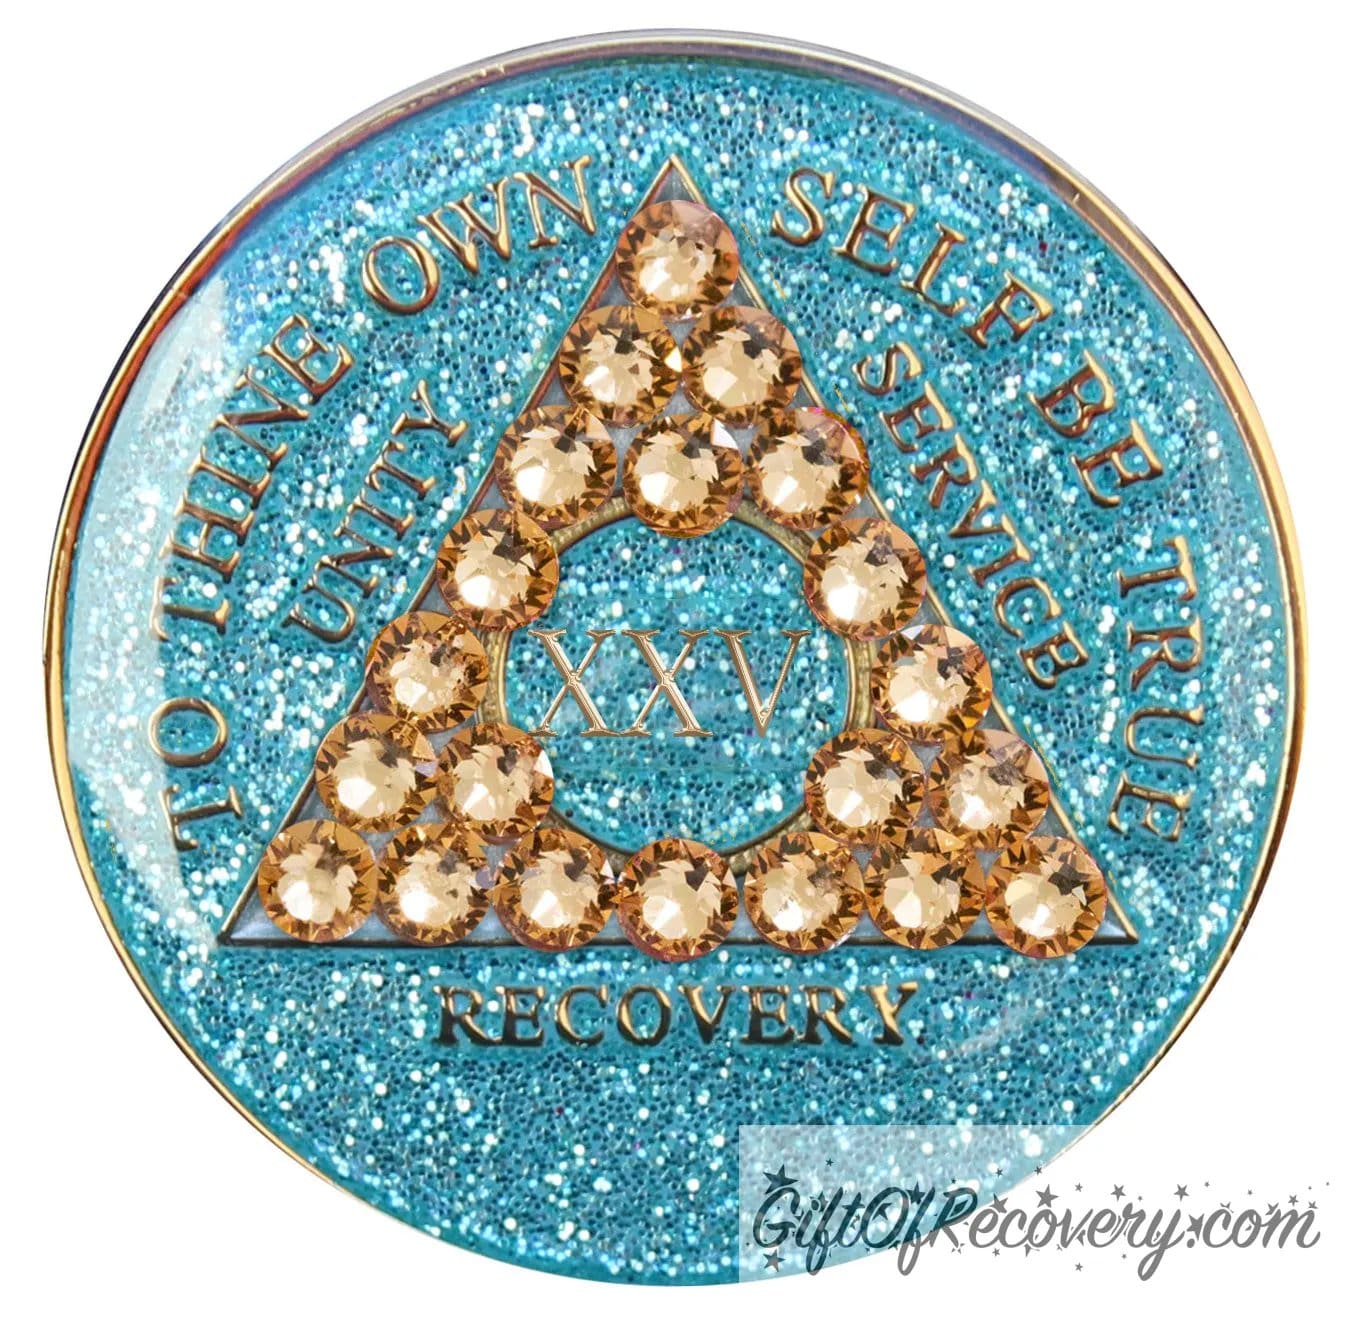 25 year Aqua glitter AA medallion with 21 gold genuine crystal making a triangle in the center, and to thine own self be true, unity, service, recovery, the roman numeral in the center and the rim of the recovery medallion embossed in 14k gold plated brass and sealed with resin for a glossy shine.